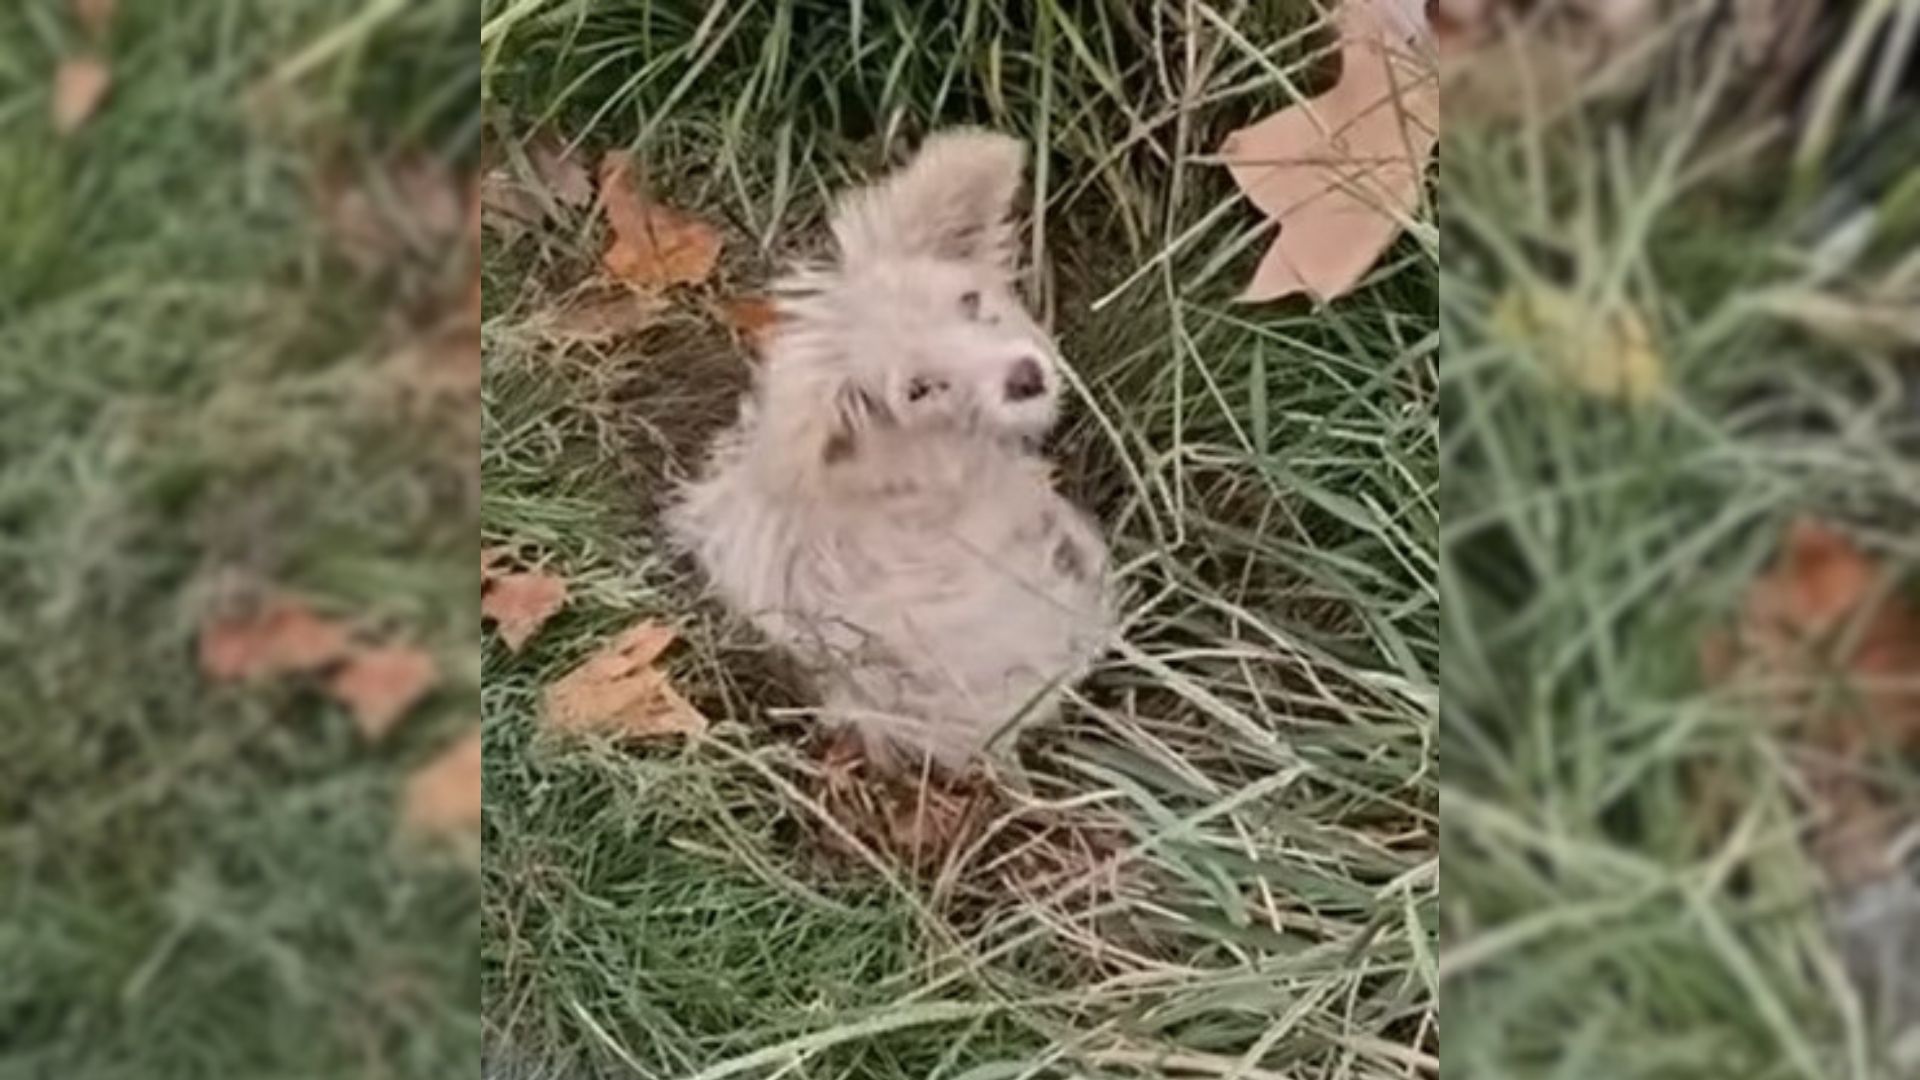 Tiny Helpless Puppy Curled Up Under A Tree In A Park, Hoping To Be Rescued